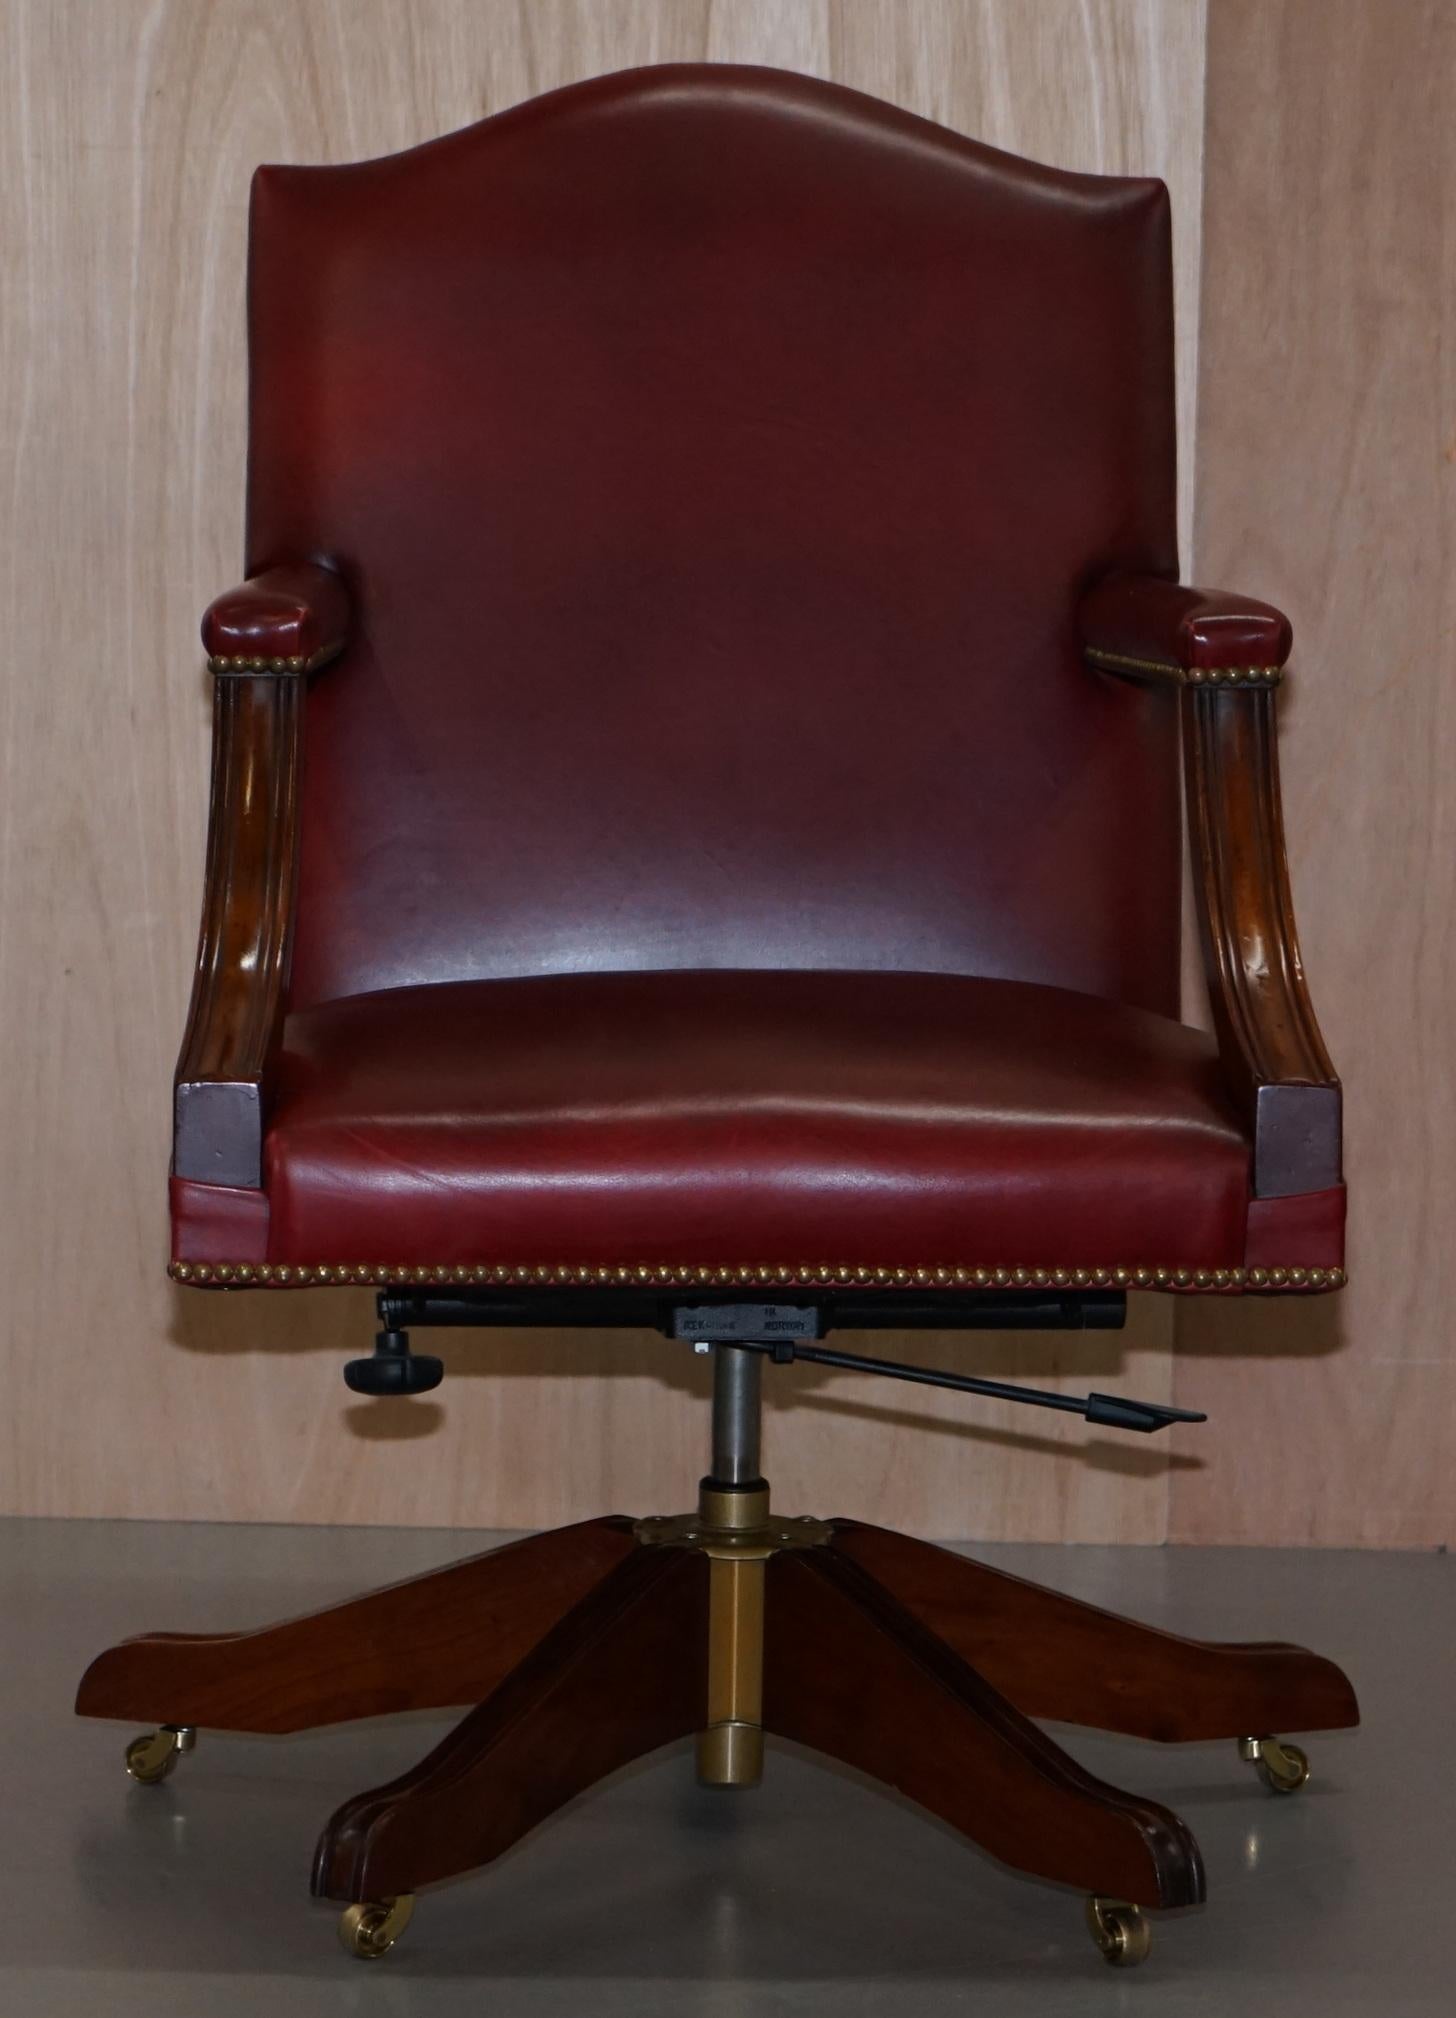 We are delighted to offer for sale this very nice vintage Oxblood leather Gainsborough captains office chair retailed through Harrods London made by Kennedy Furniture RRP £3800

I have the matching pedestal desk, architects desk and various other